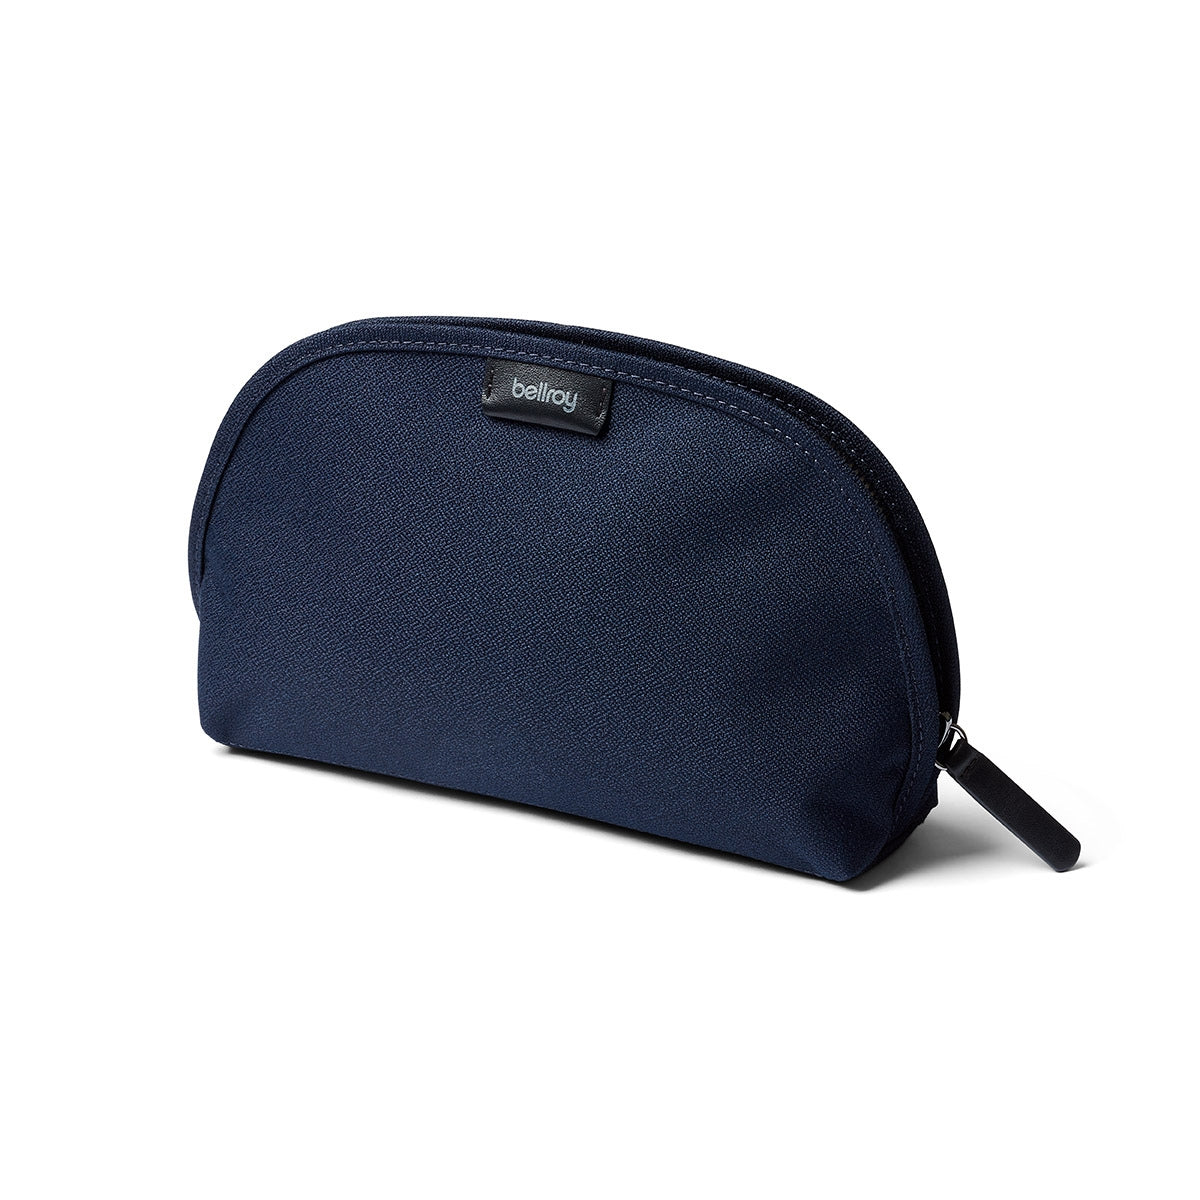 Bellroy Classic Pouch in Navy